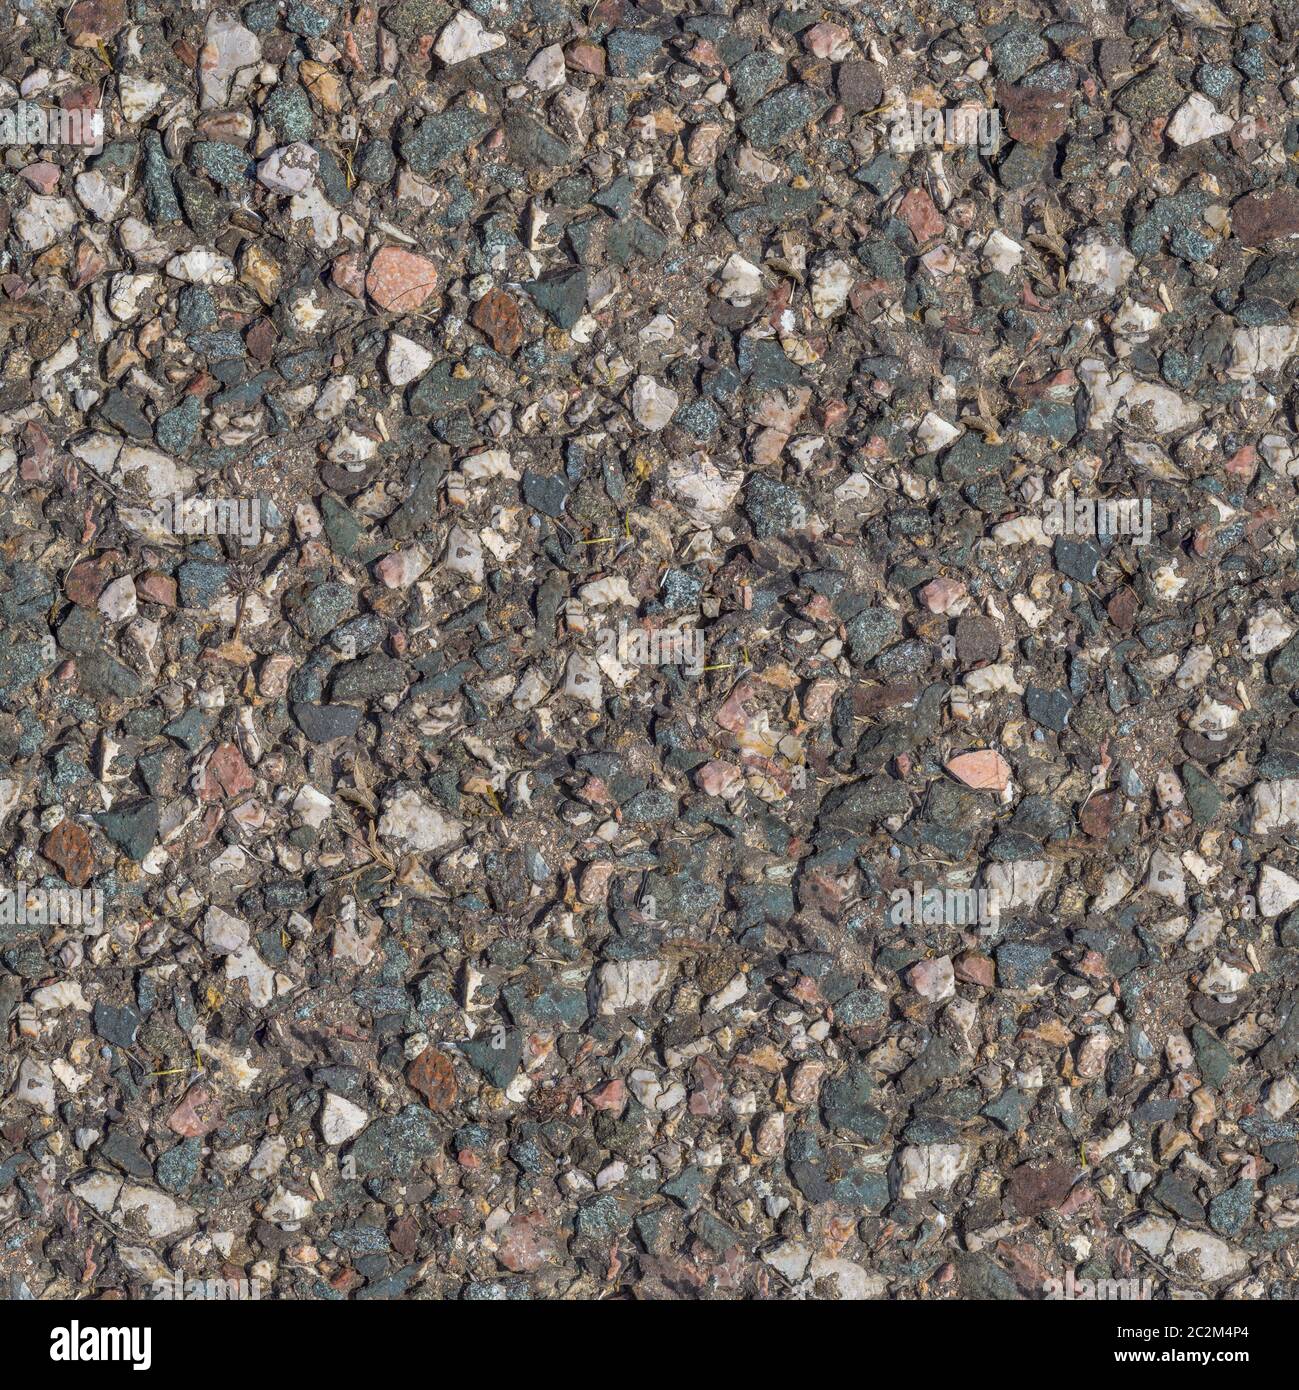 Seamless Tileable Texture of Fragment of Old Stone Country Road. Small Size. Stock Photo